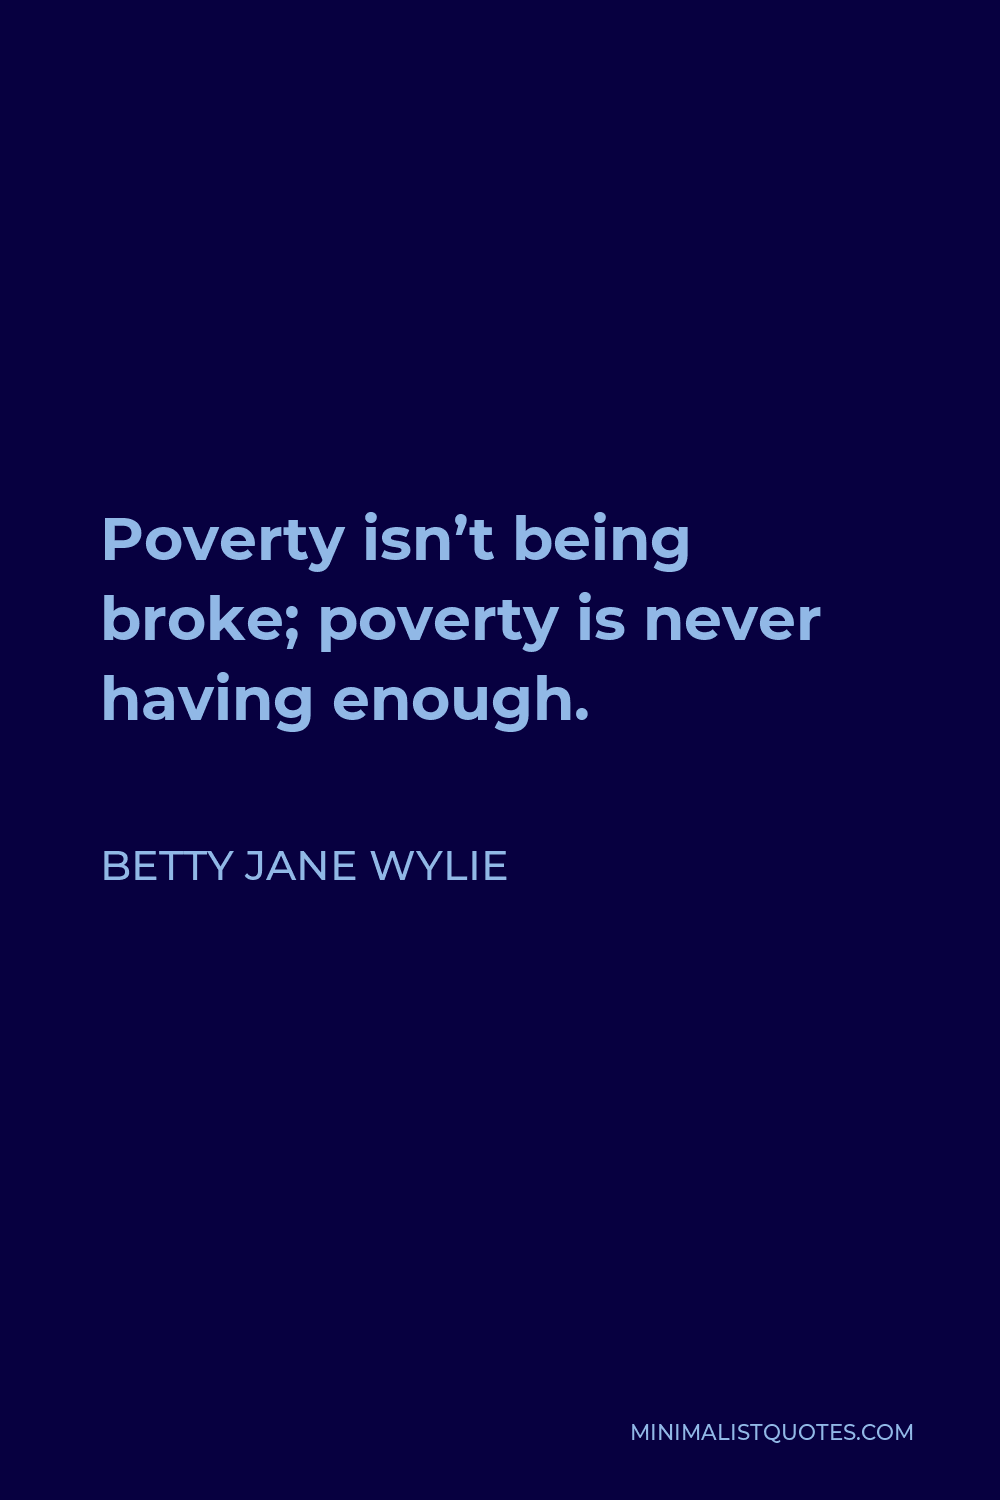 Betty Jane Wylie Quote - Poverty isn’t being broke; poverty is never having enough.